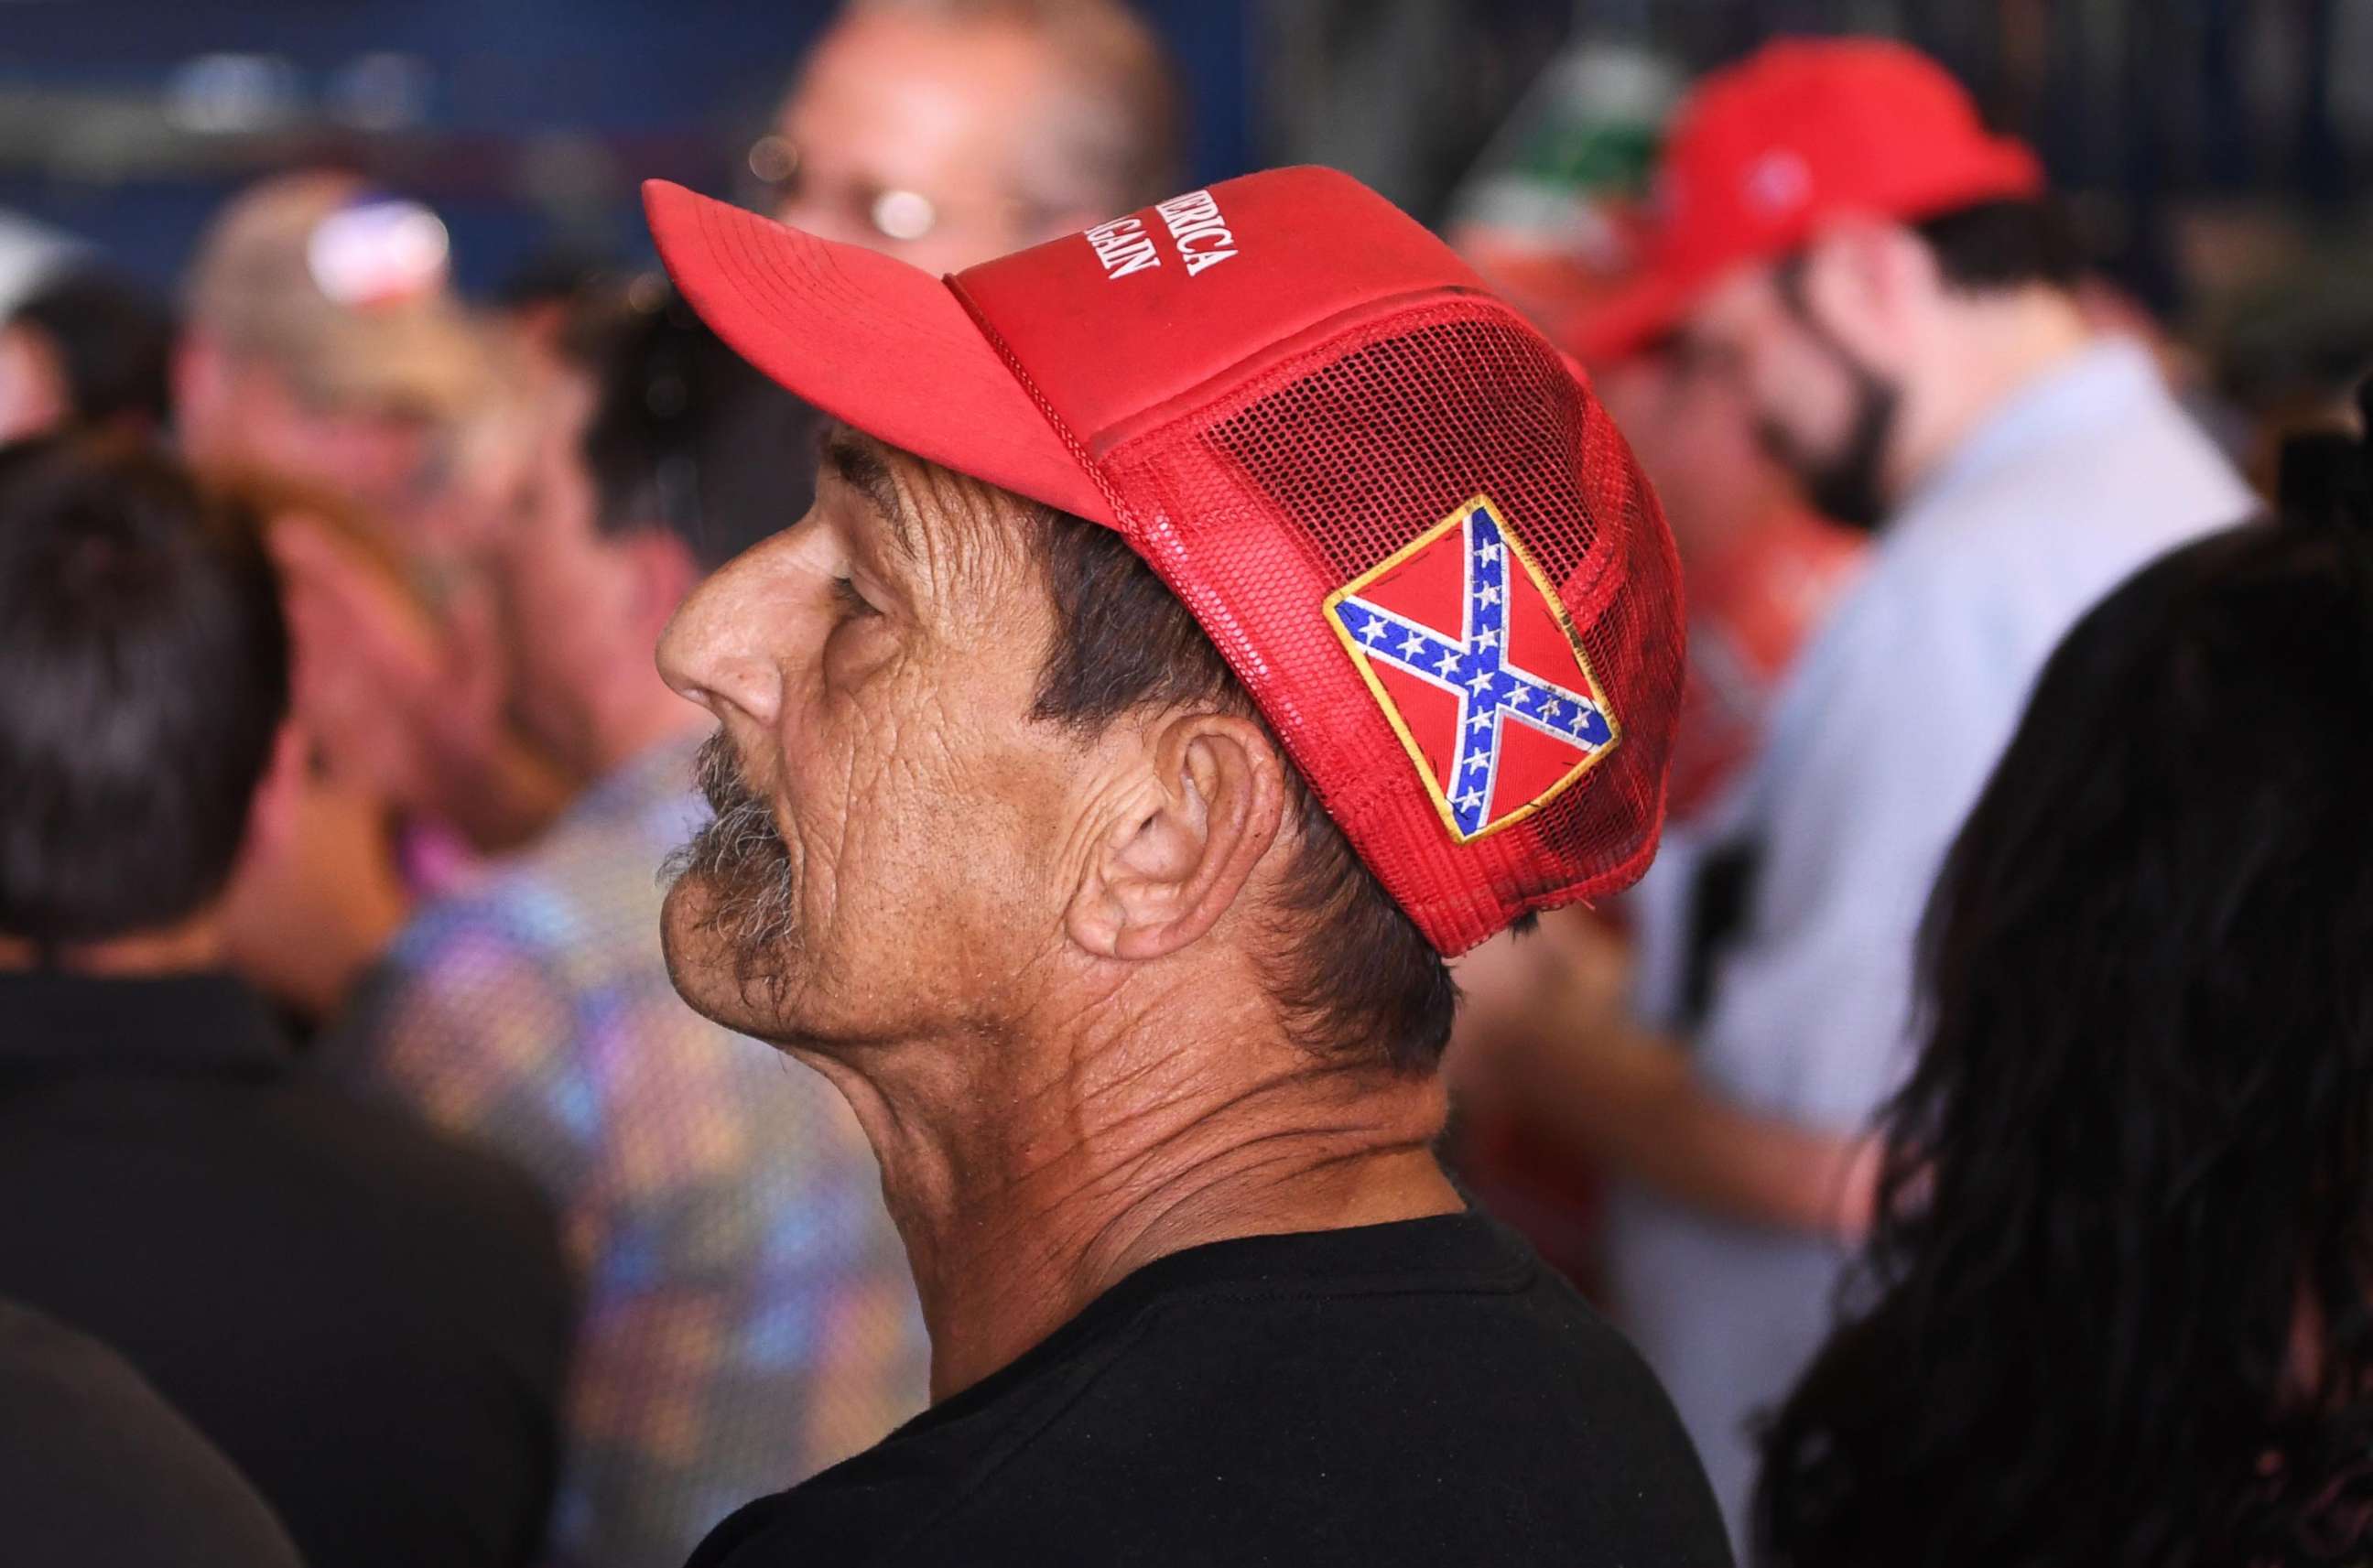 PHOTO: A man has a confederate flag on his "Make America Great" hat during a Donald Trump rally at the Wings Over the Rockies Museum in Denver, July 29, 2016. 